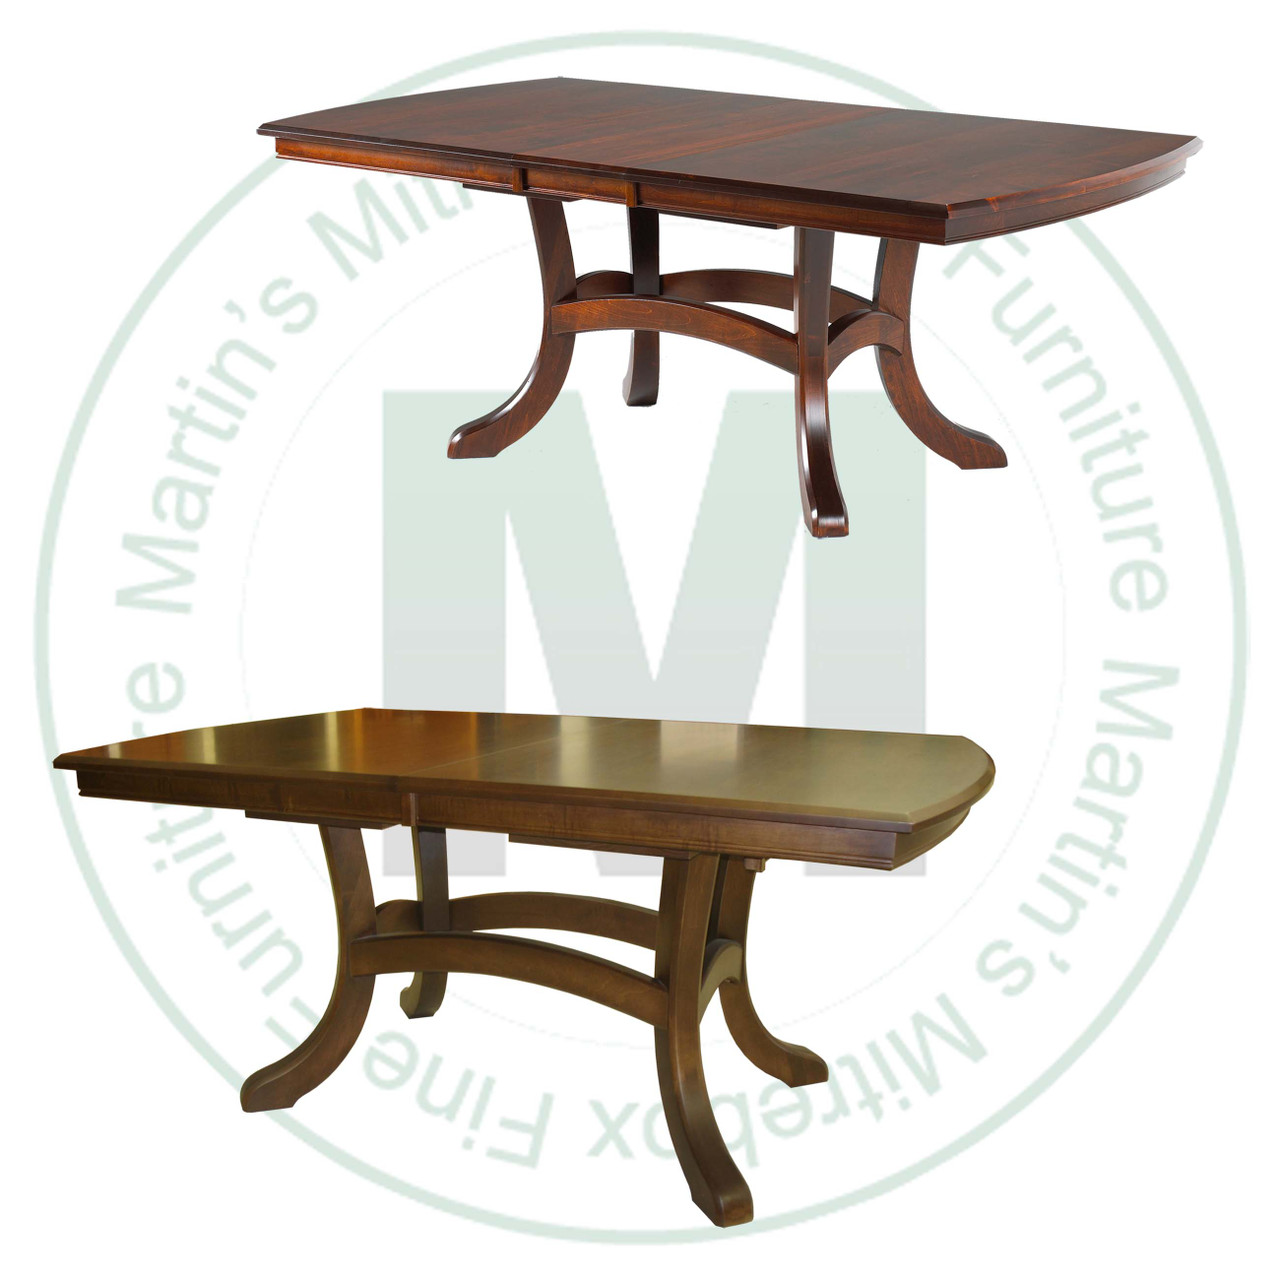 Maple Jordan Double Pedestal Table 54''D x 66''W x 30''H With 2 - 12'' Leaves. Table Has 1.25'' Thick Top